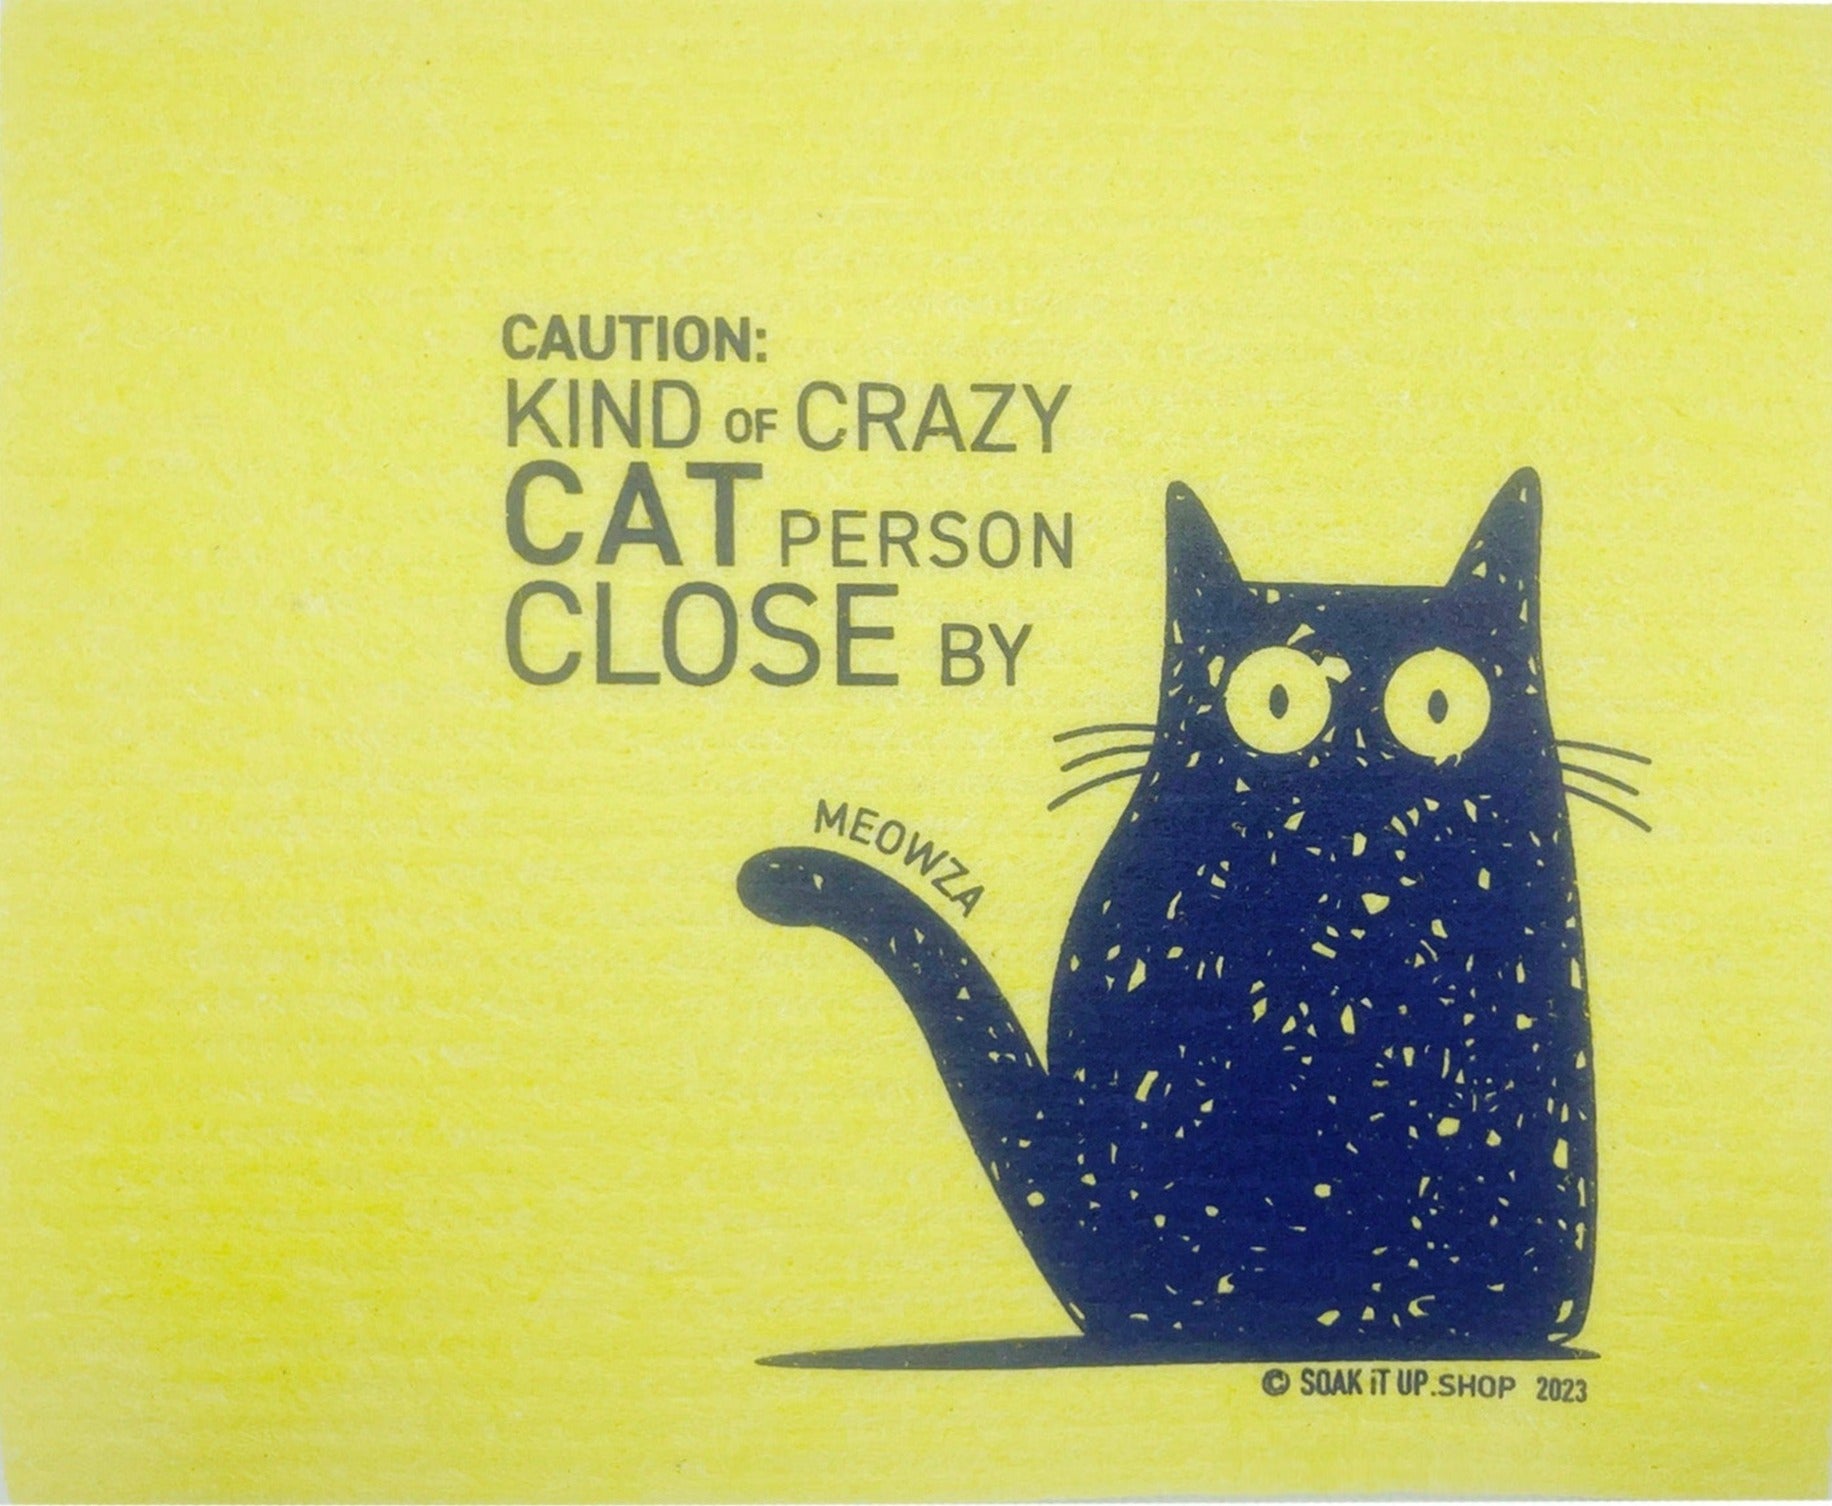 Caution: Kind of CRAZY CAT PERSON close by - Swedish